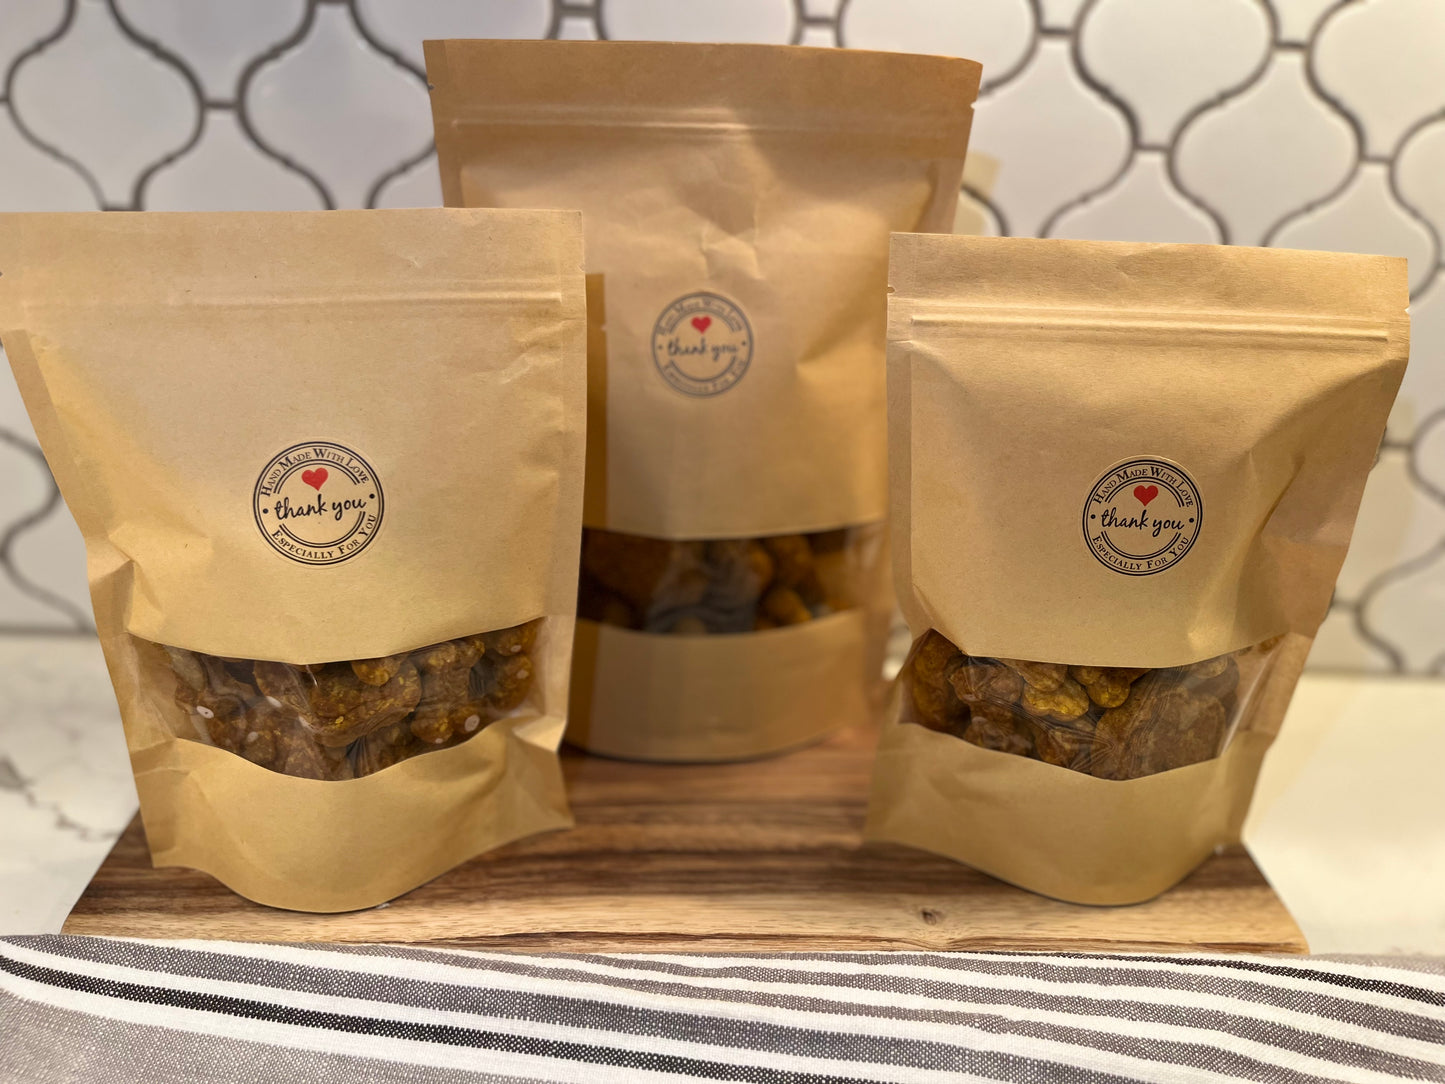 Medium Bag contains 28 Homemade Healthy Dog Treats- FREE shipping when you buy 2 or more